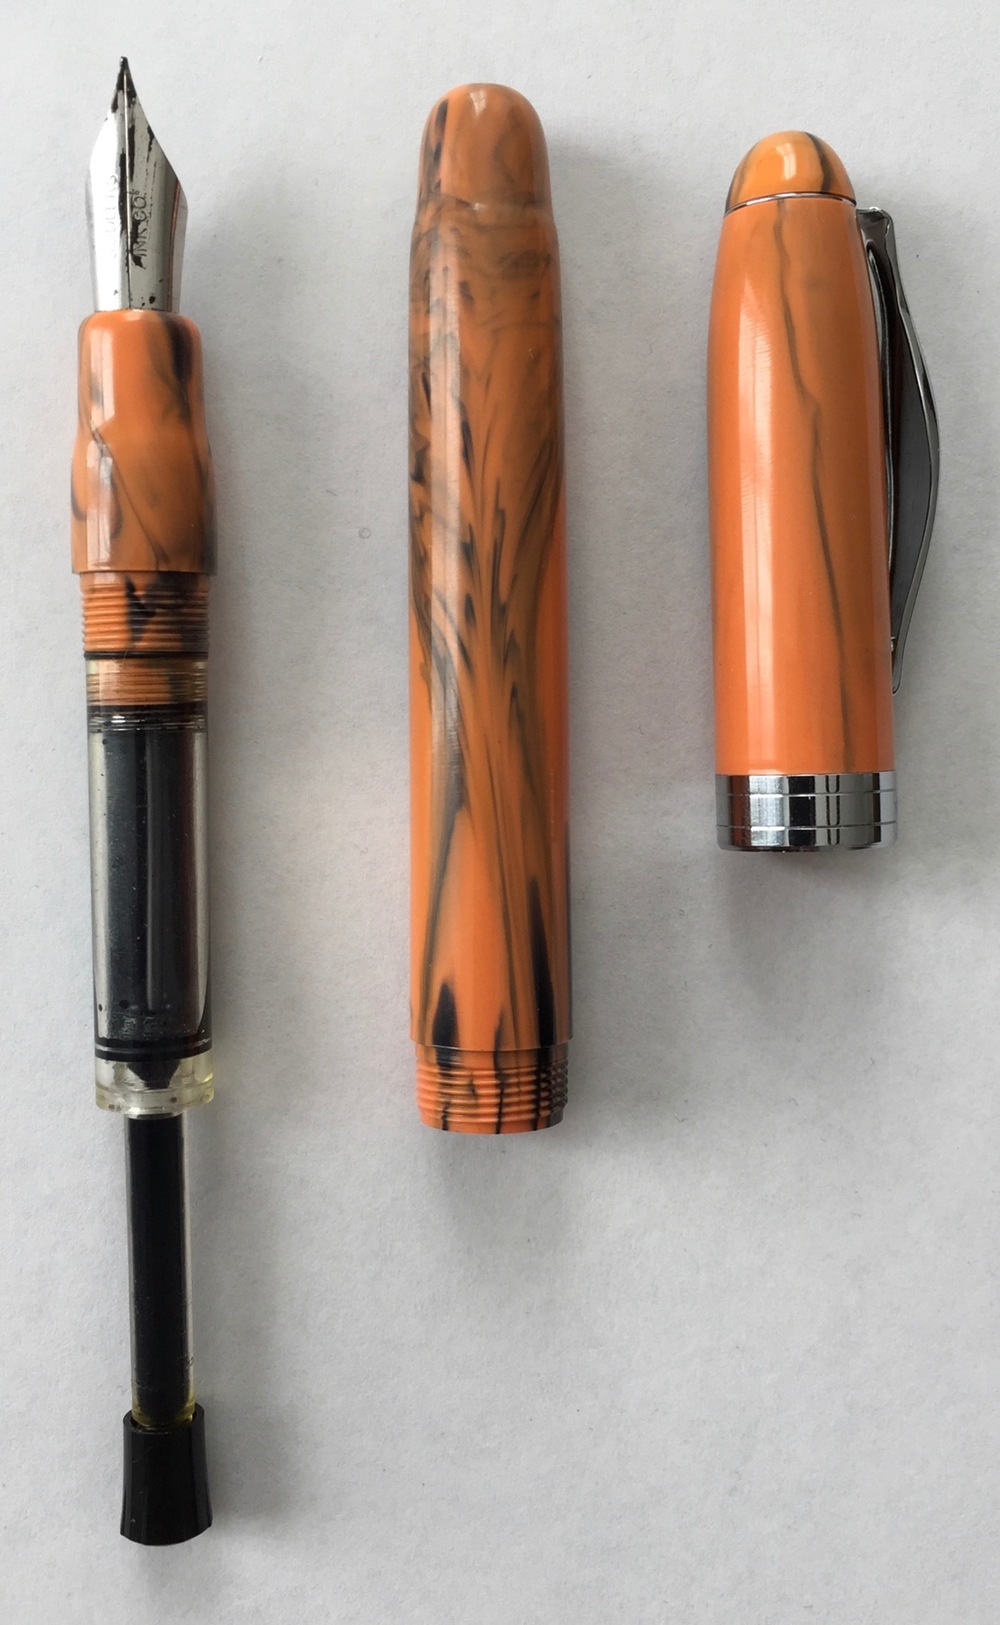 Noodlers Ahab Fountain Pen Review